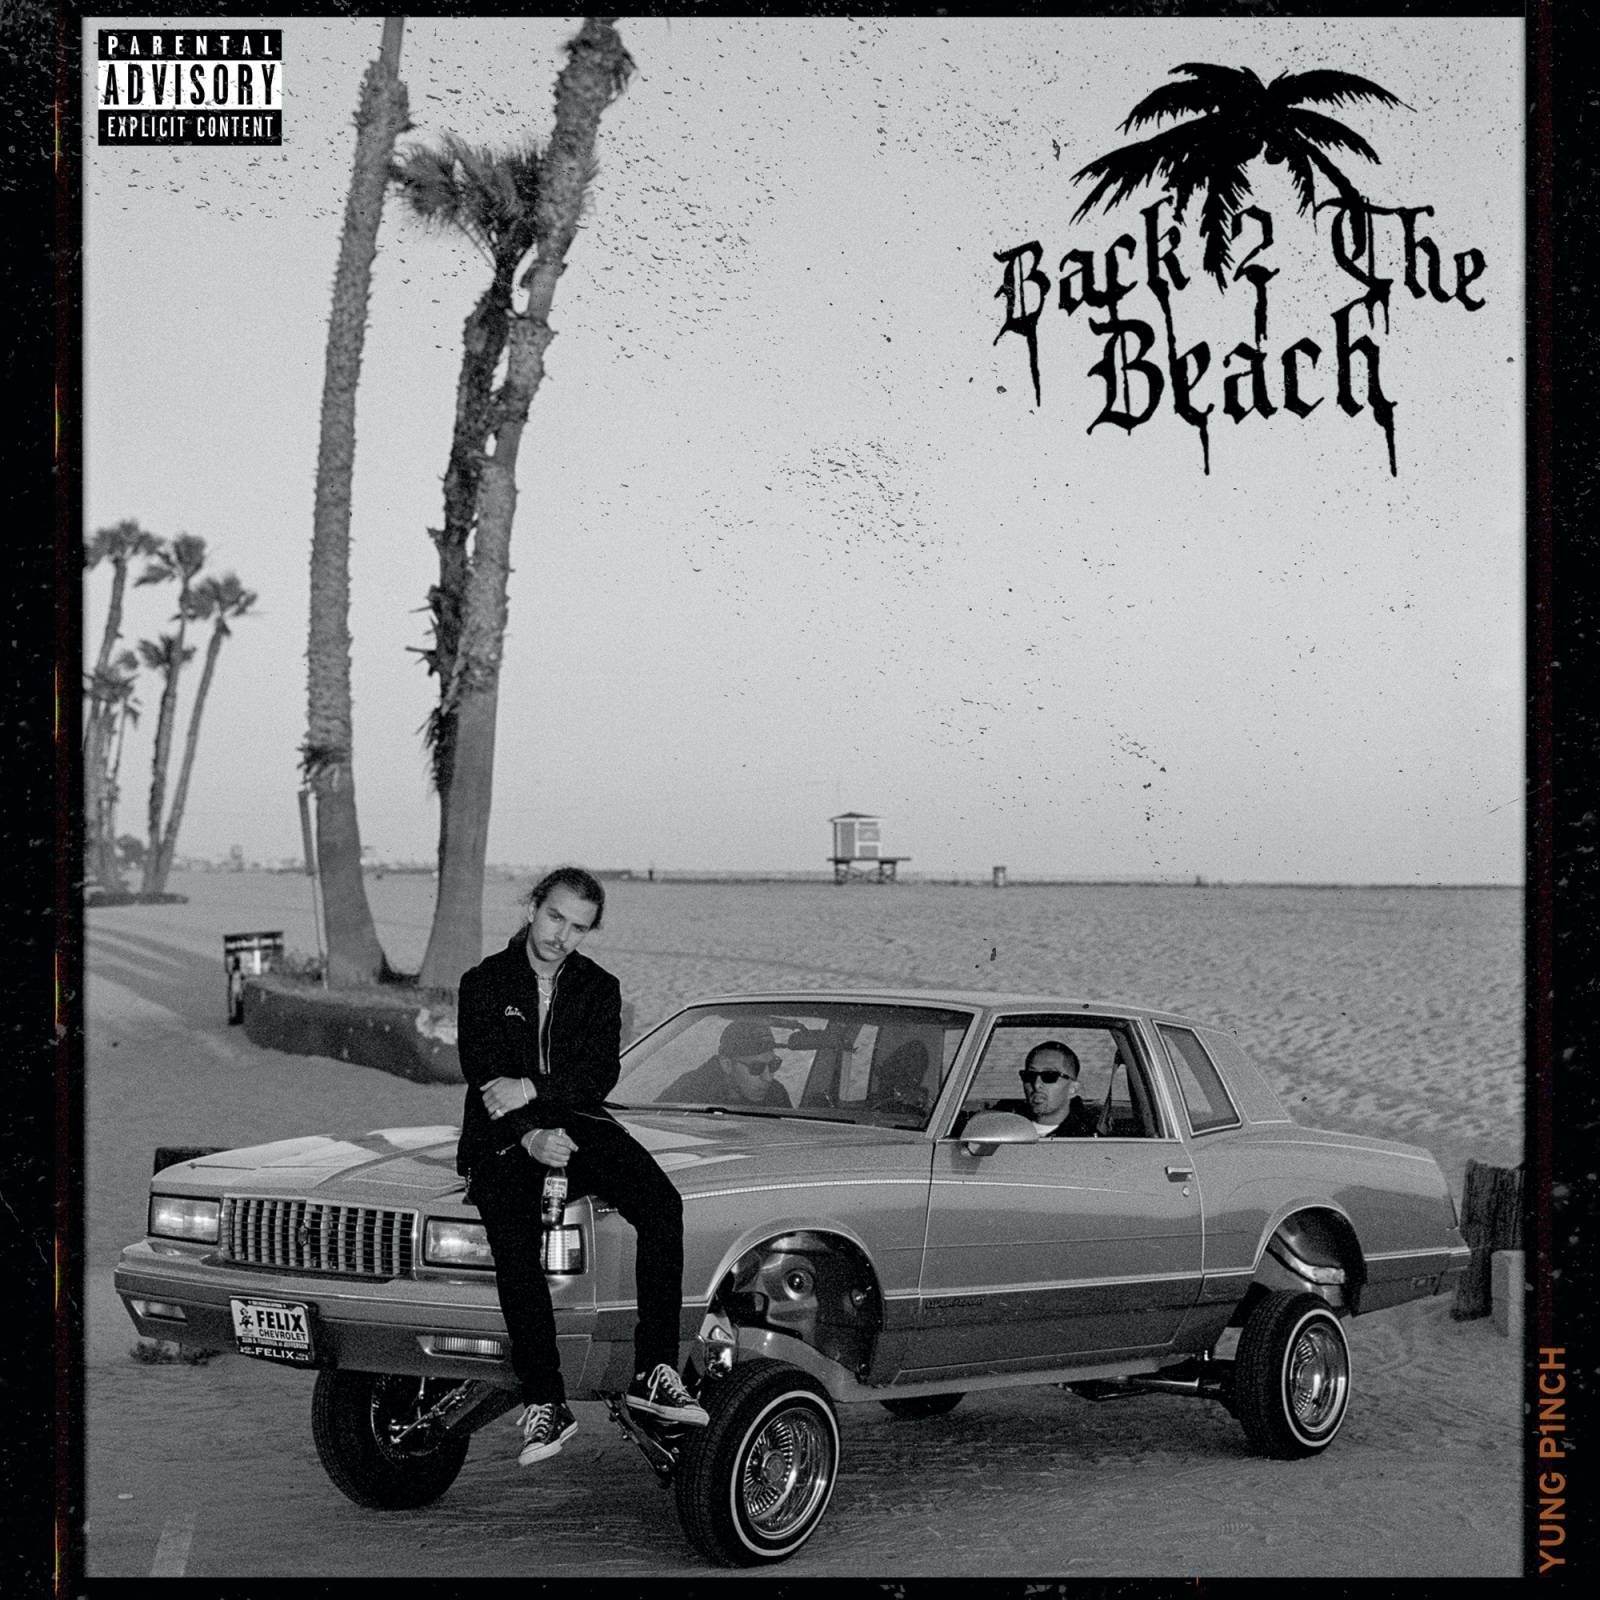 Yung Pinch Releases Debut Album 'Back 2 The Beach'